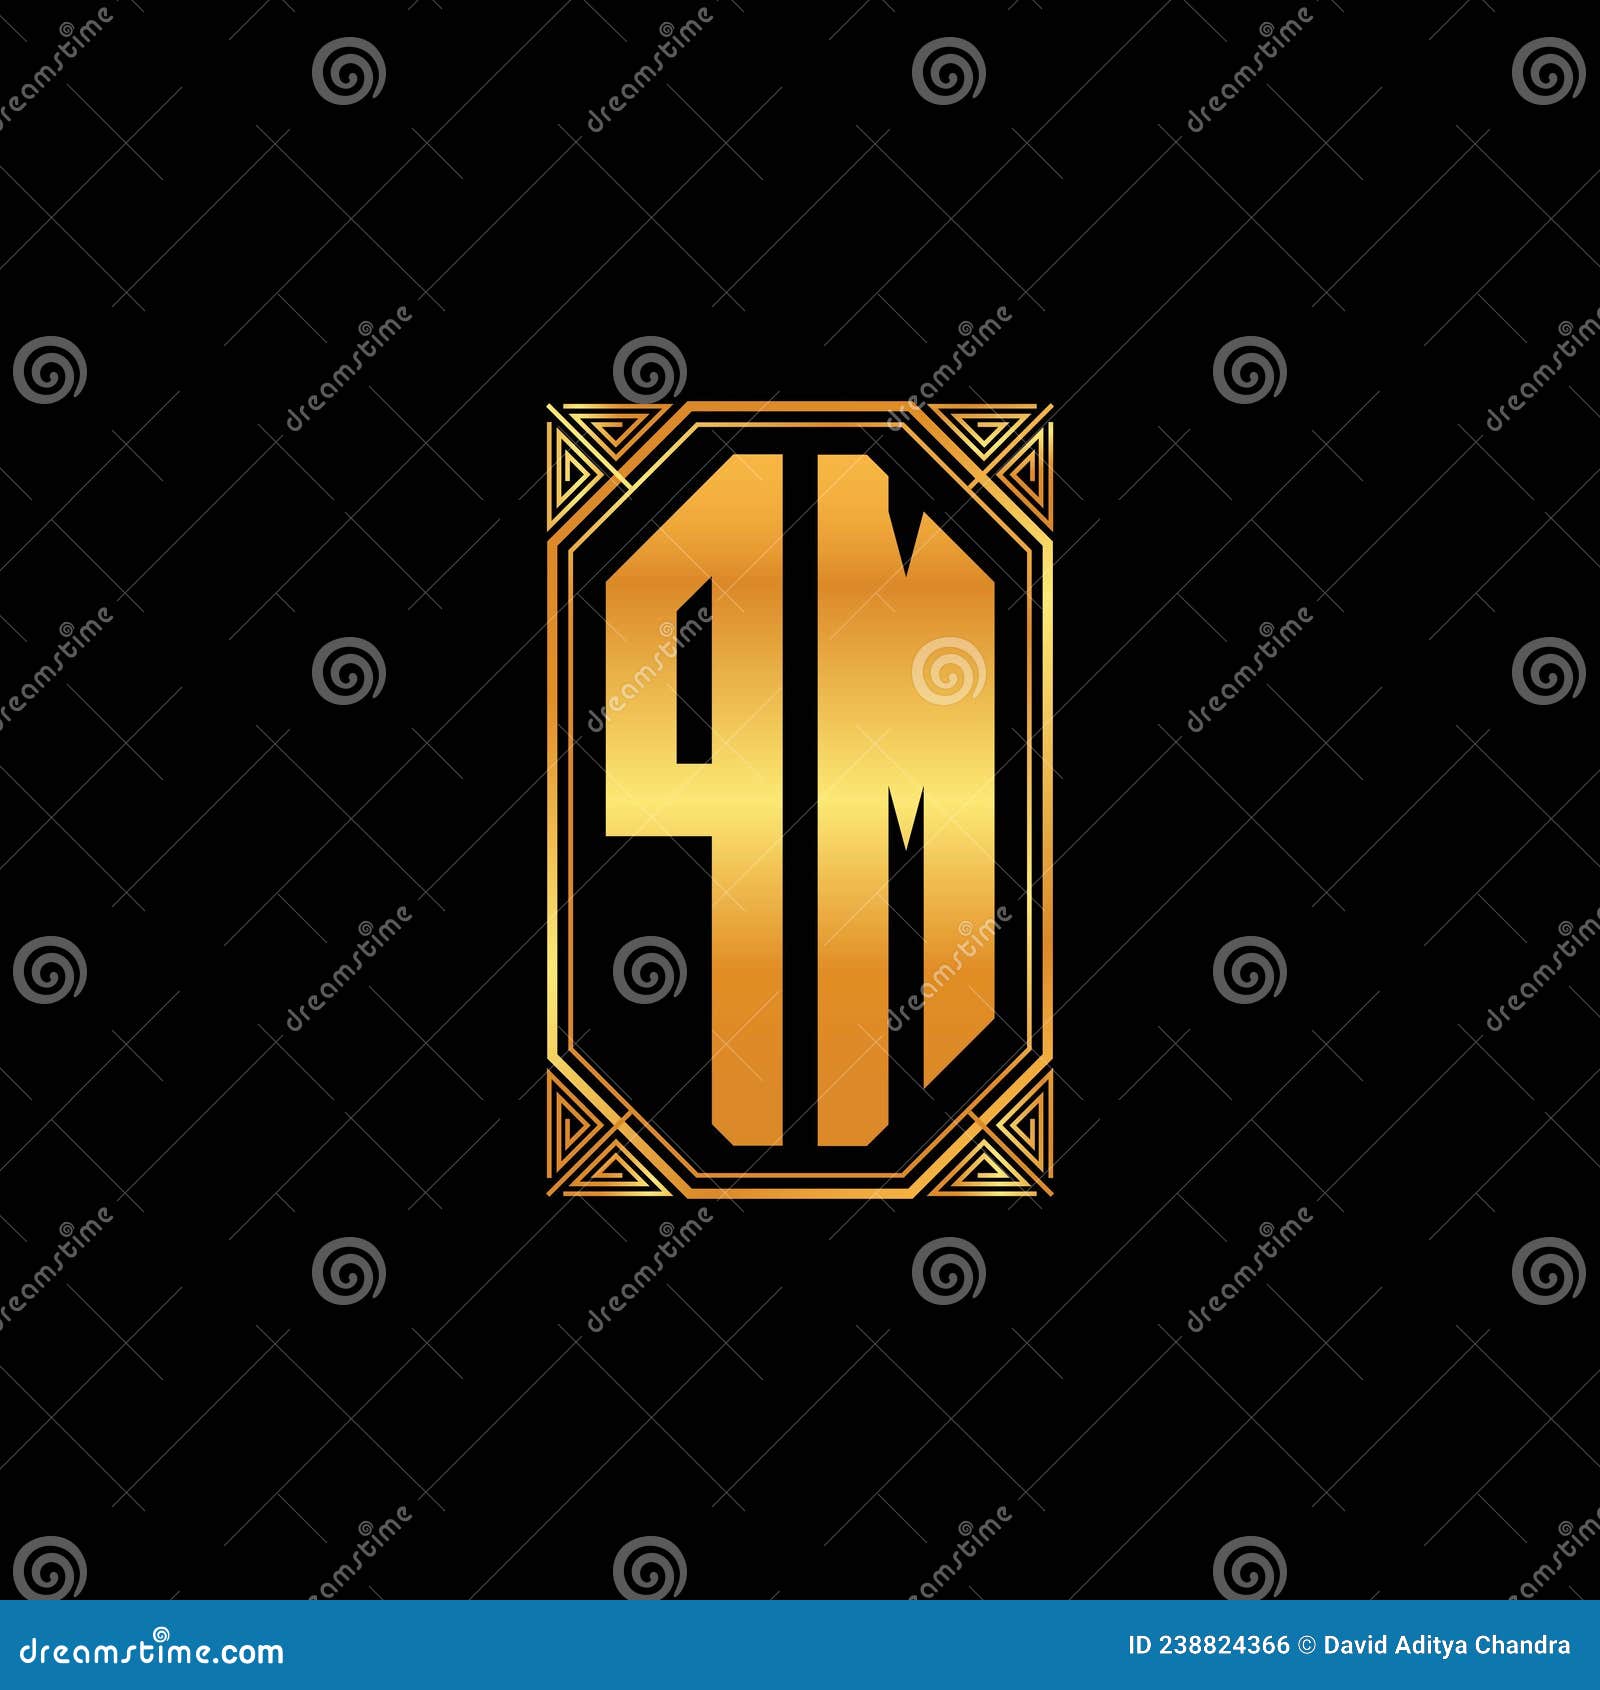 PM Letter Initial with Royal Wing Logo Template Stock Vector Image